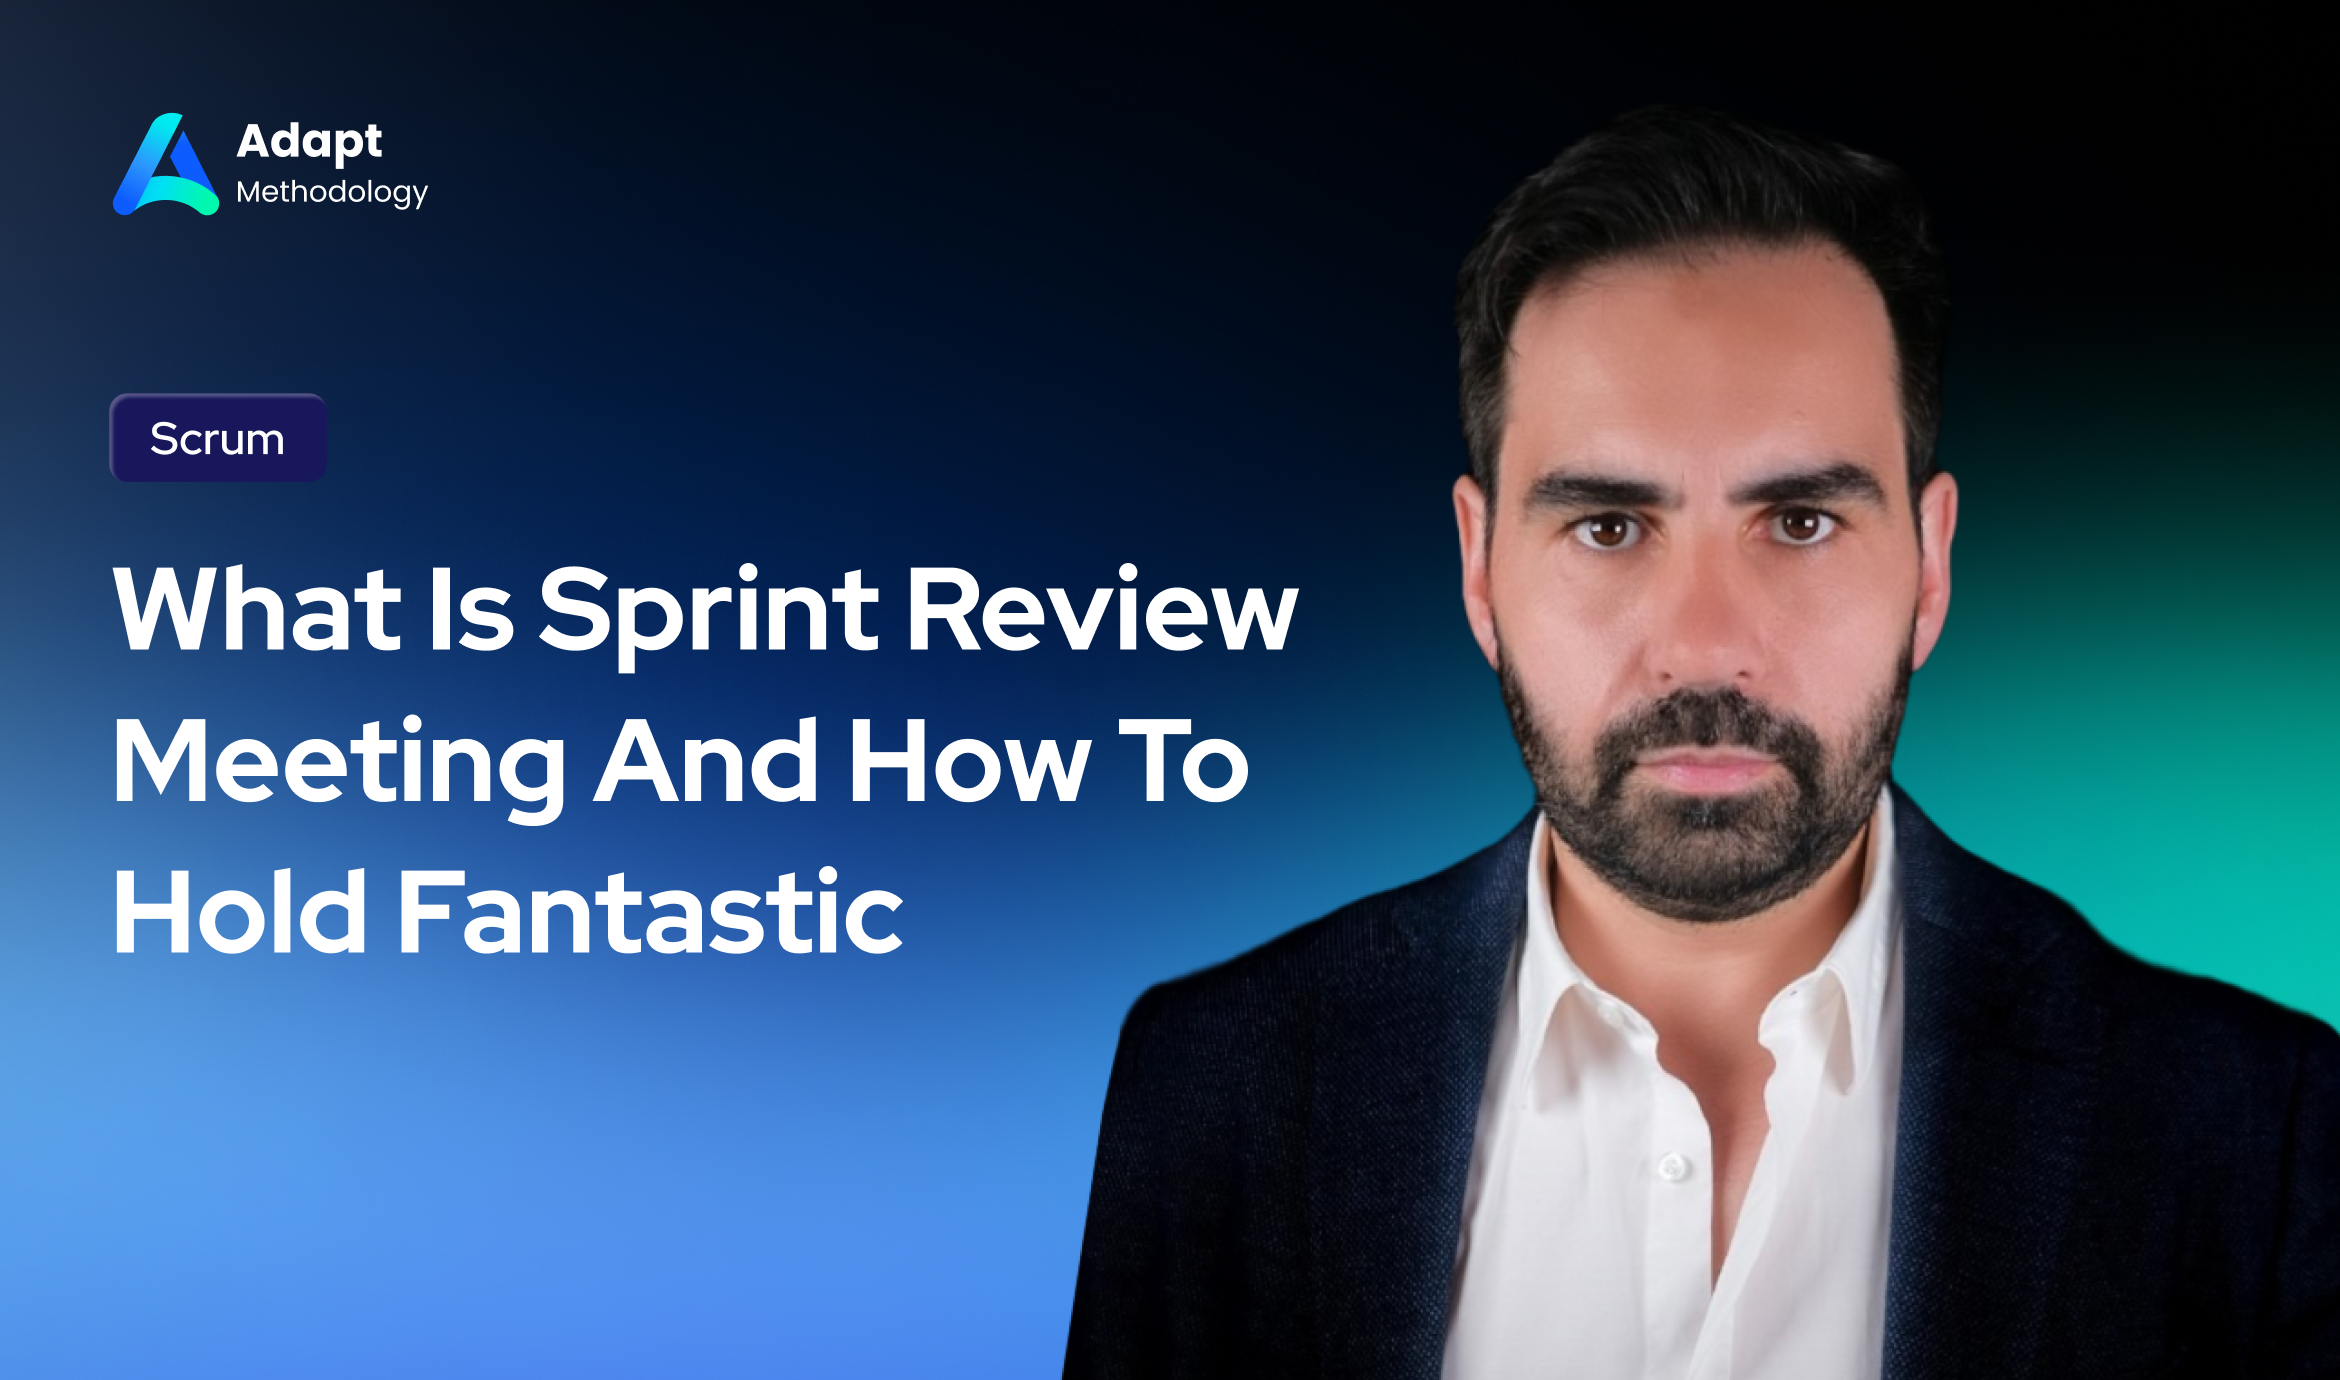 What Is Sprint Review Meeting And How To Hold Fantastic